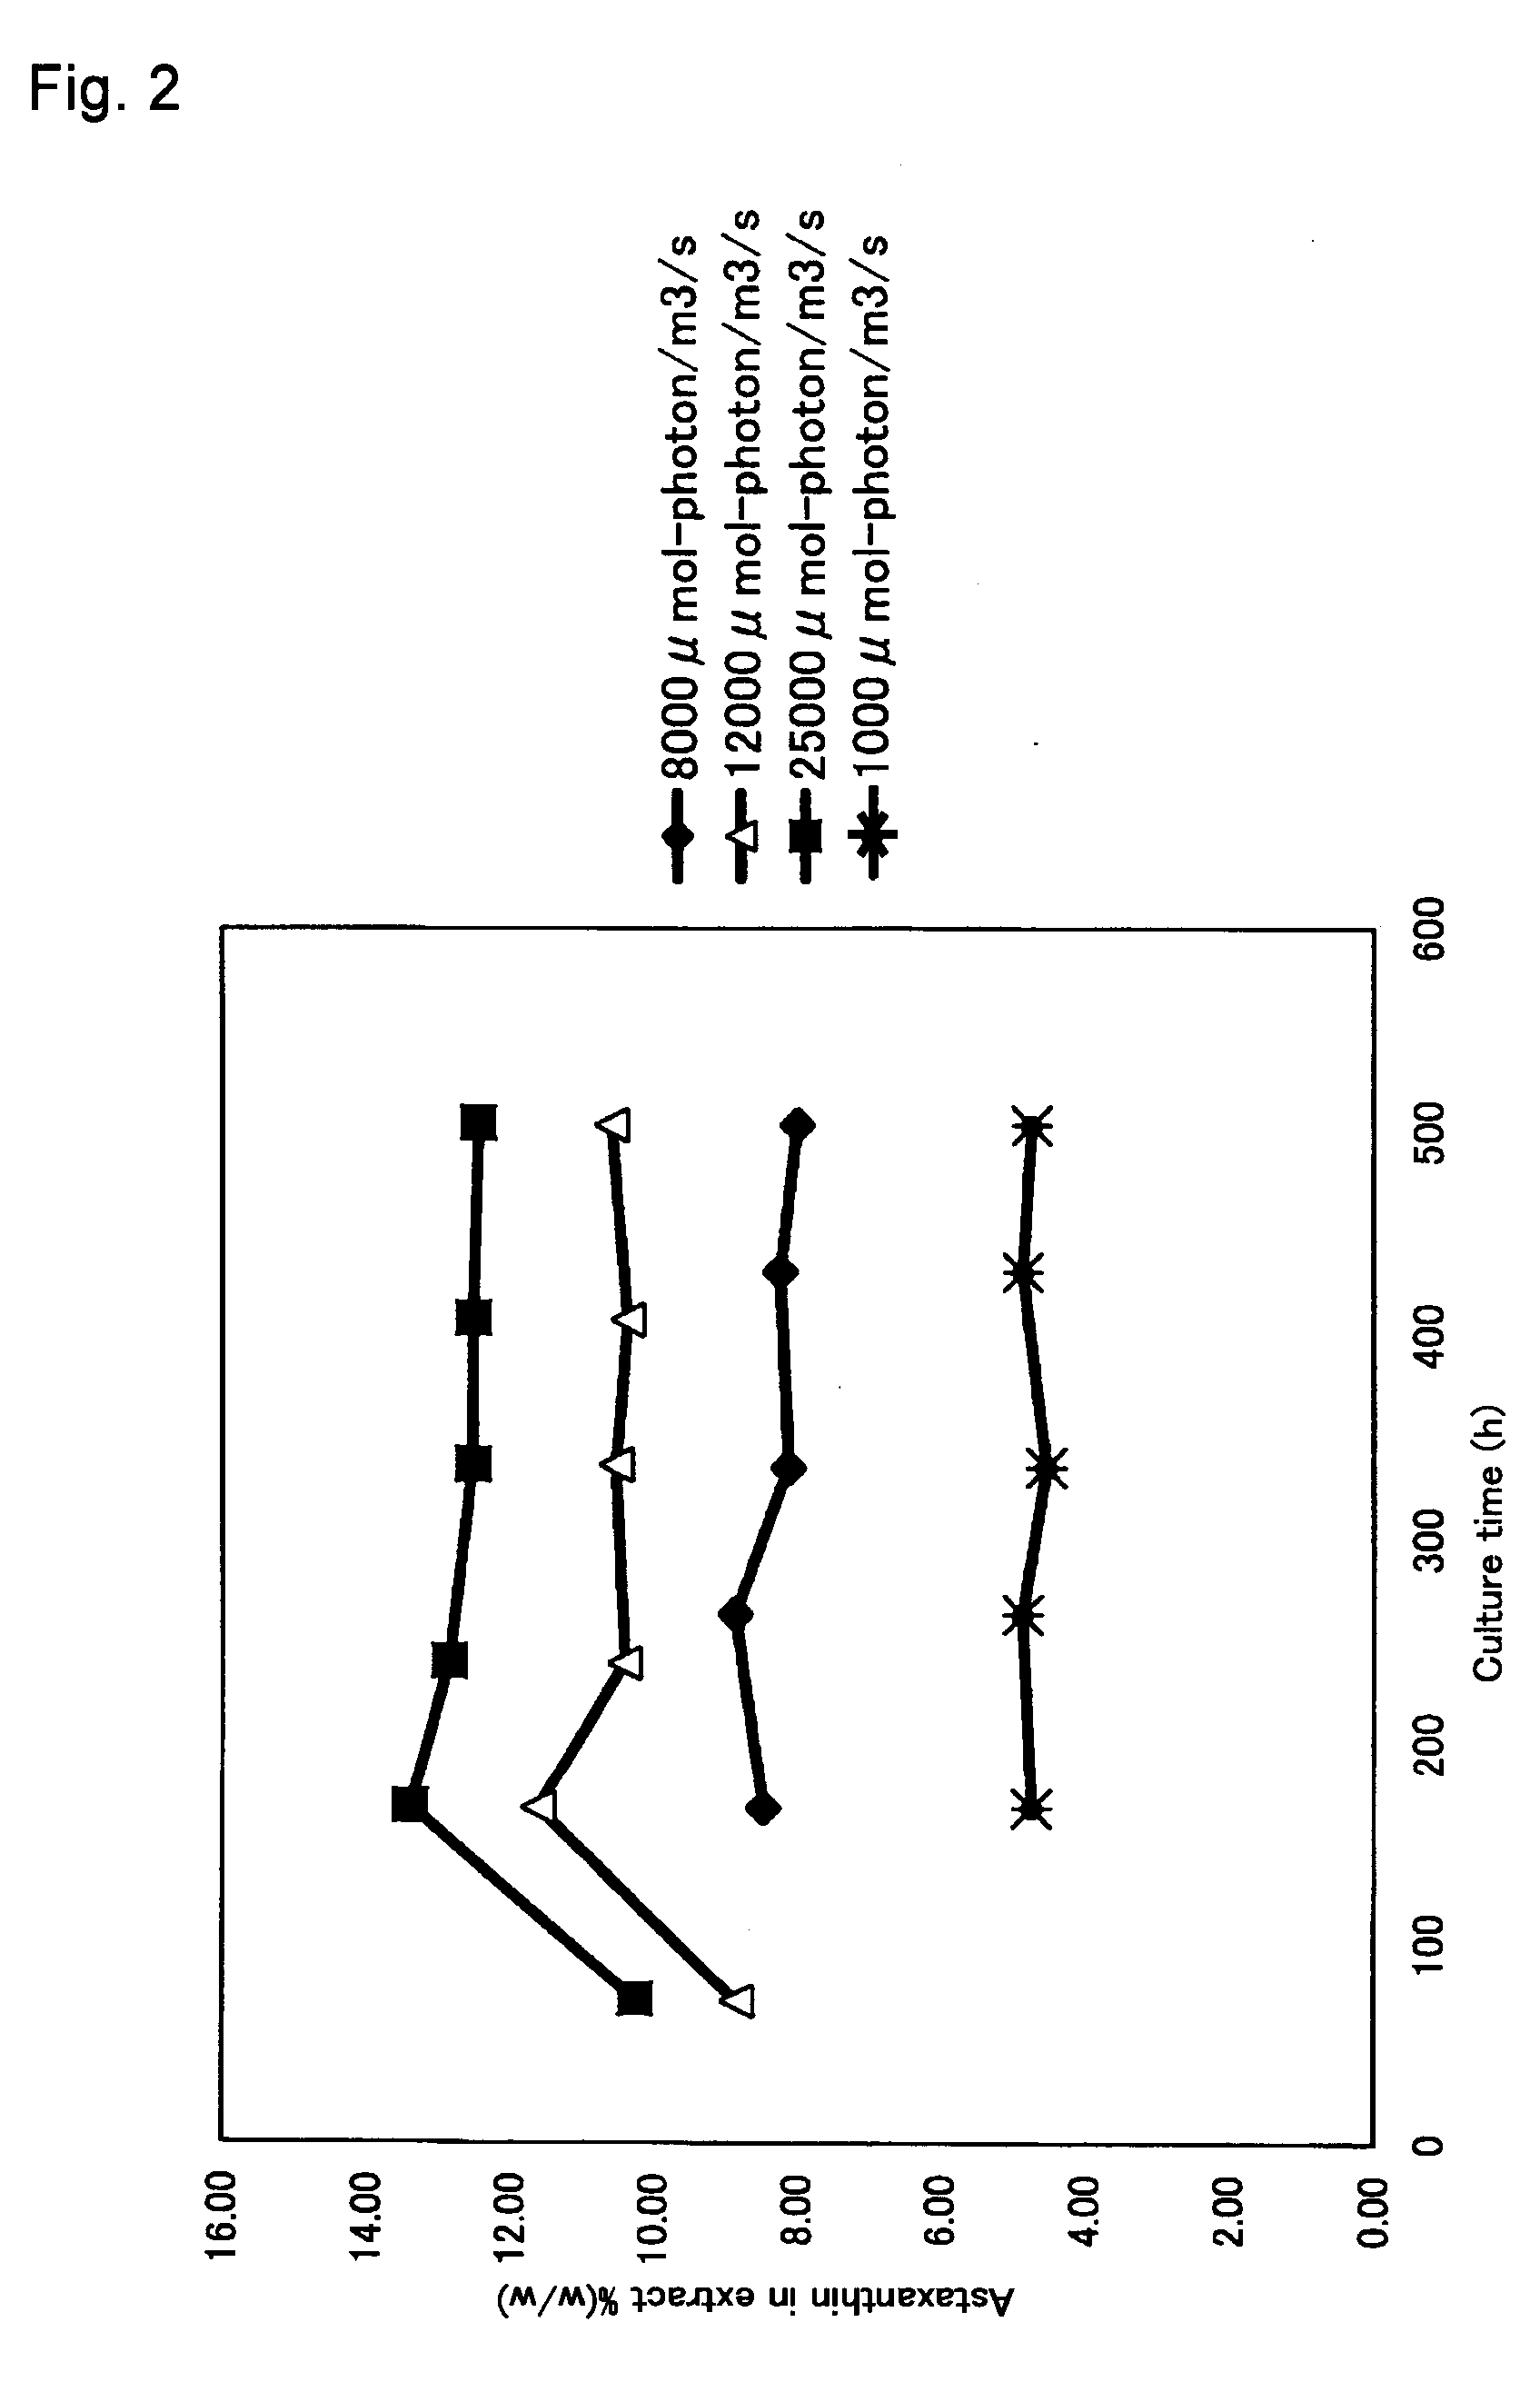 Green Alga Extract with High Astaxanthin Content and Method of Producing the Same